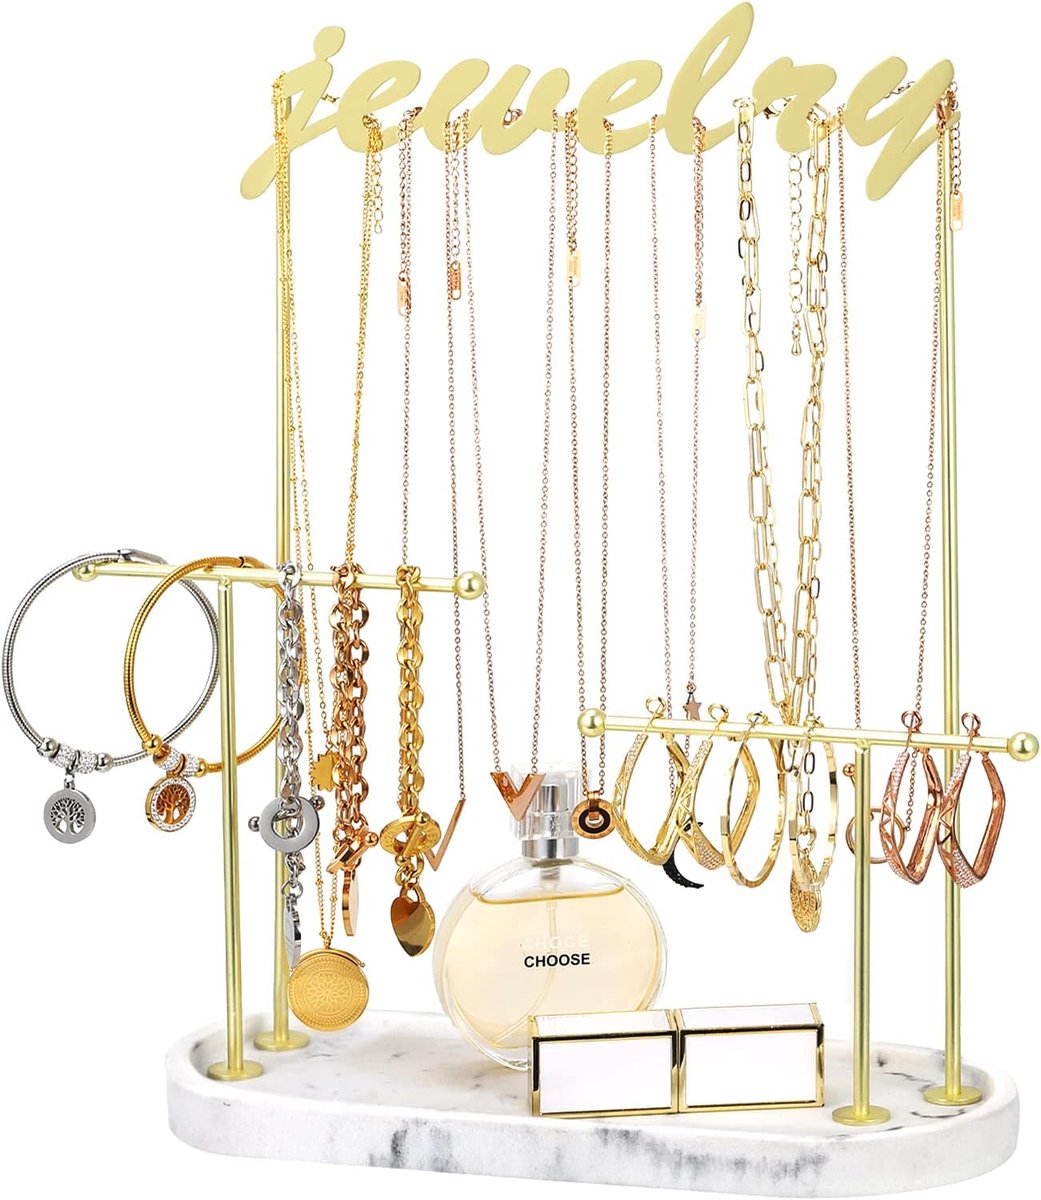 Organizer Stand, 3 Tiers Alphabet Jewelry Holder Stand with Oval Resin Tray Golden Metal Rack, Necklace Bracelets Rings Earrings Display Tower Jewelry Tree Stand, Marble White